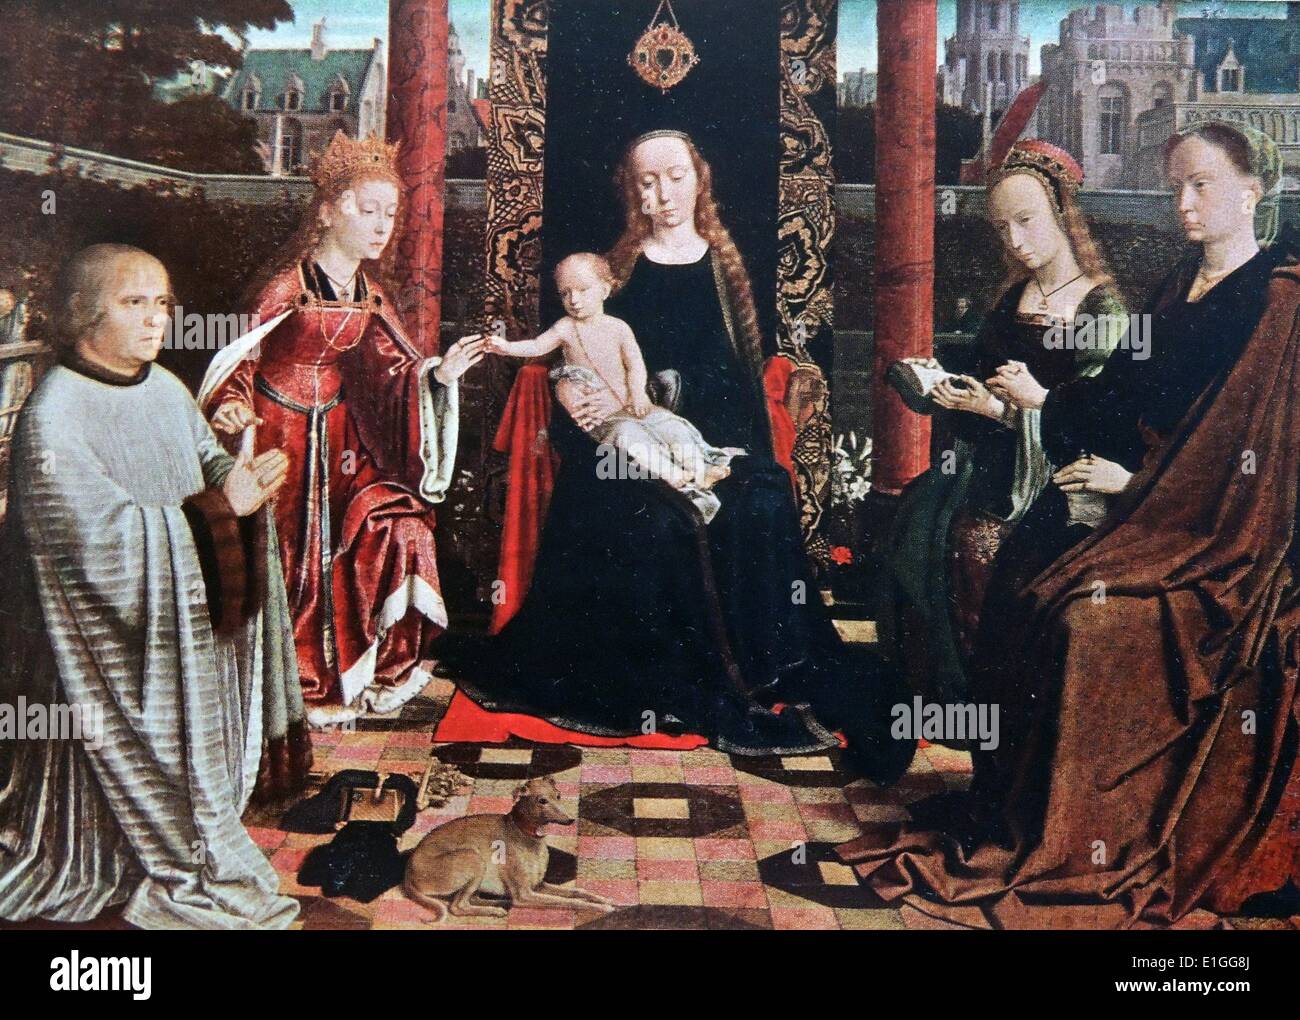 The Mystic Marriage of Saint Catherine depicts the virgin saint going through a mystical marriage ceremony with the infant Christ, in the presence of the Virgin Mary, consecrating themselves and their virginity to him. By Gerard David (1460 - 1523) an Netherlandish painter and manuscript illuminator. Dated 1510 Stock Photo